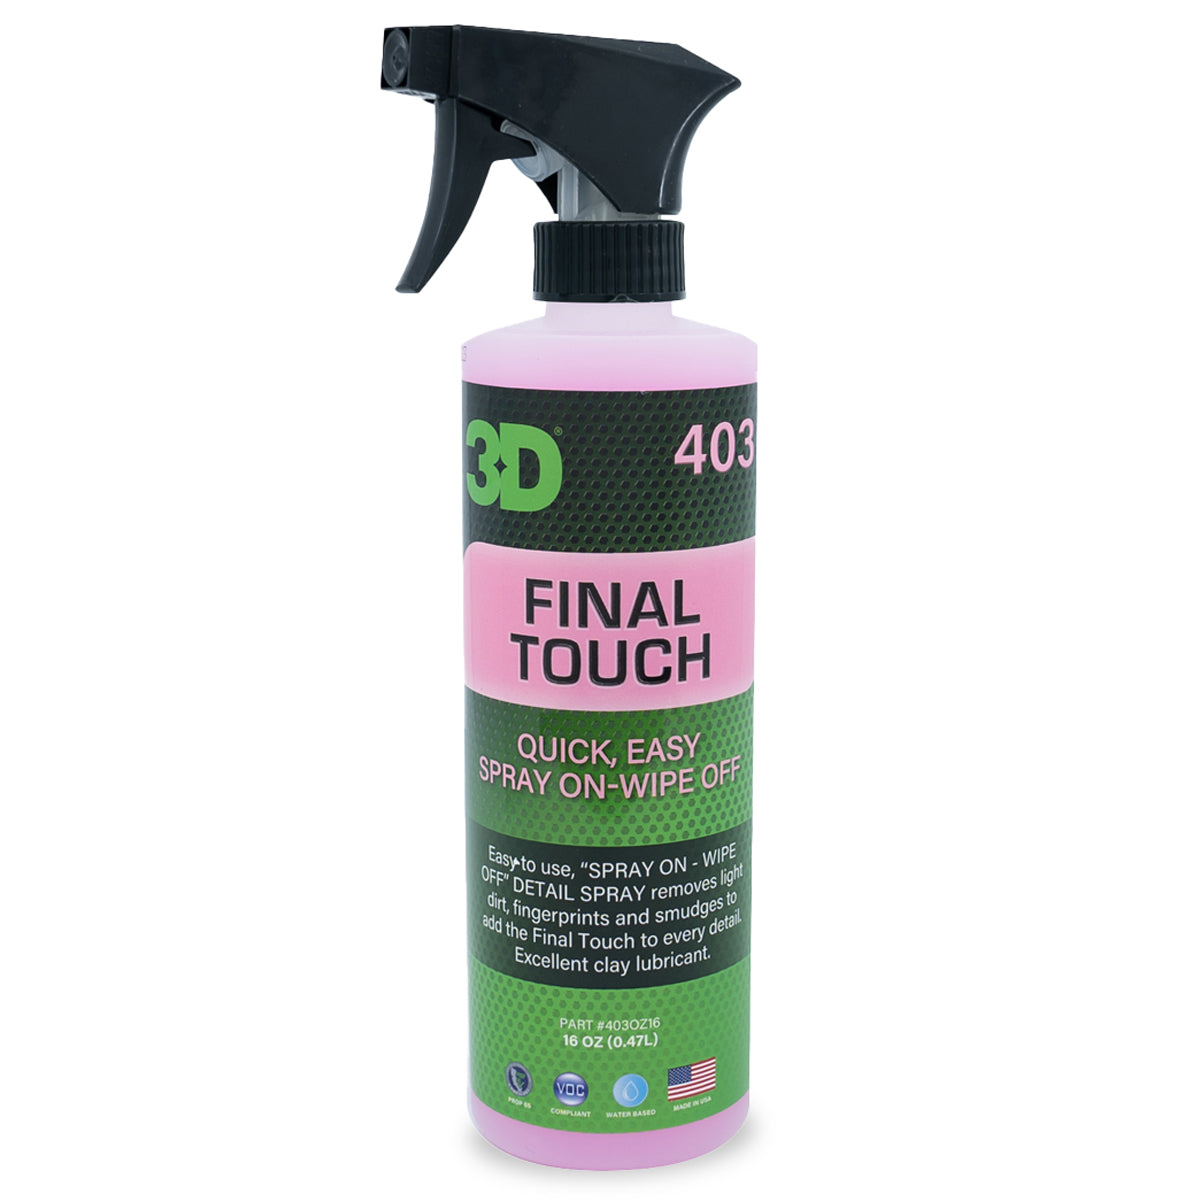 Four Star Ultimate Clay Lubricant - 18 oz.